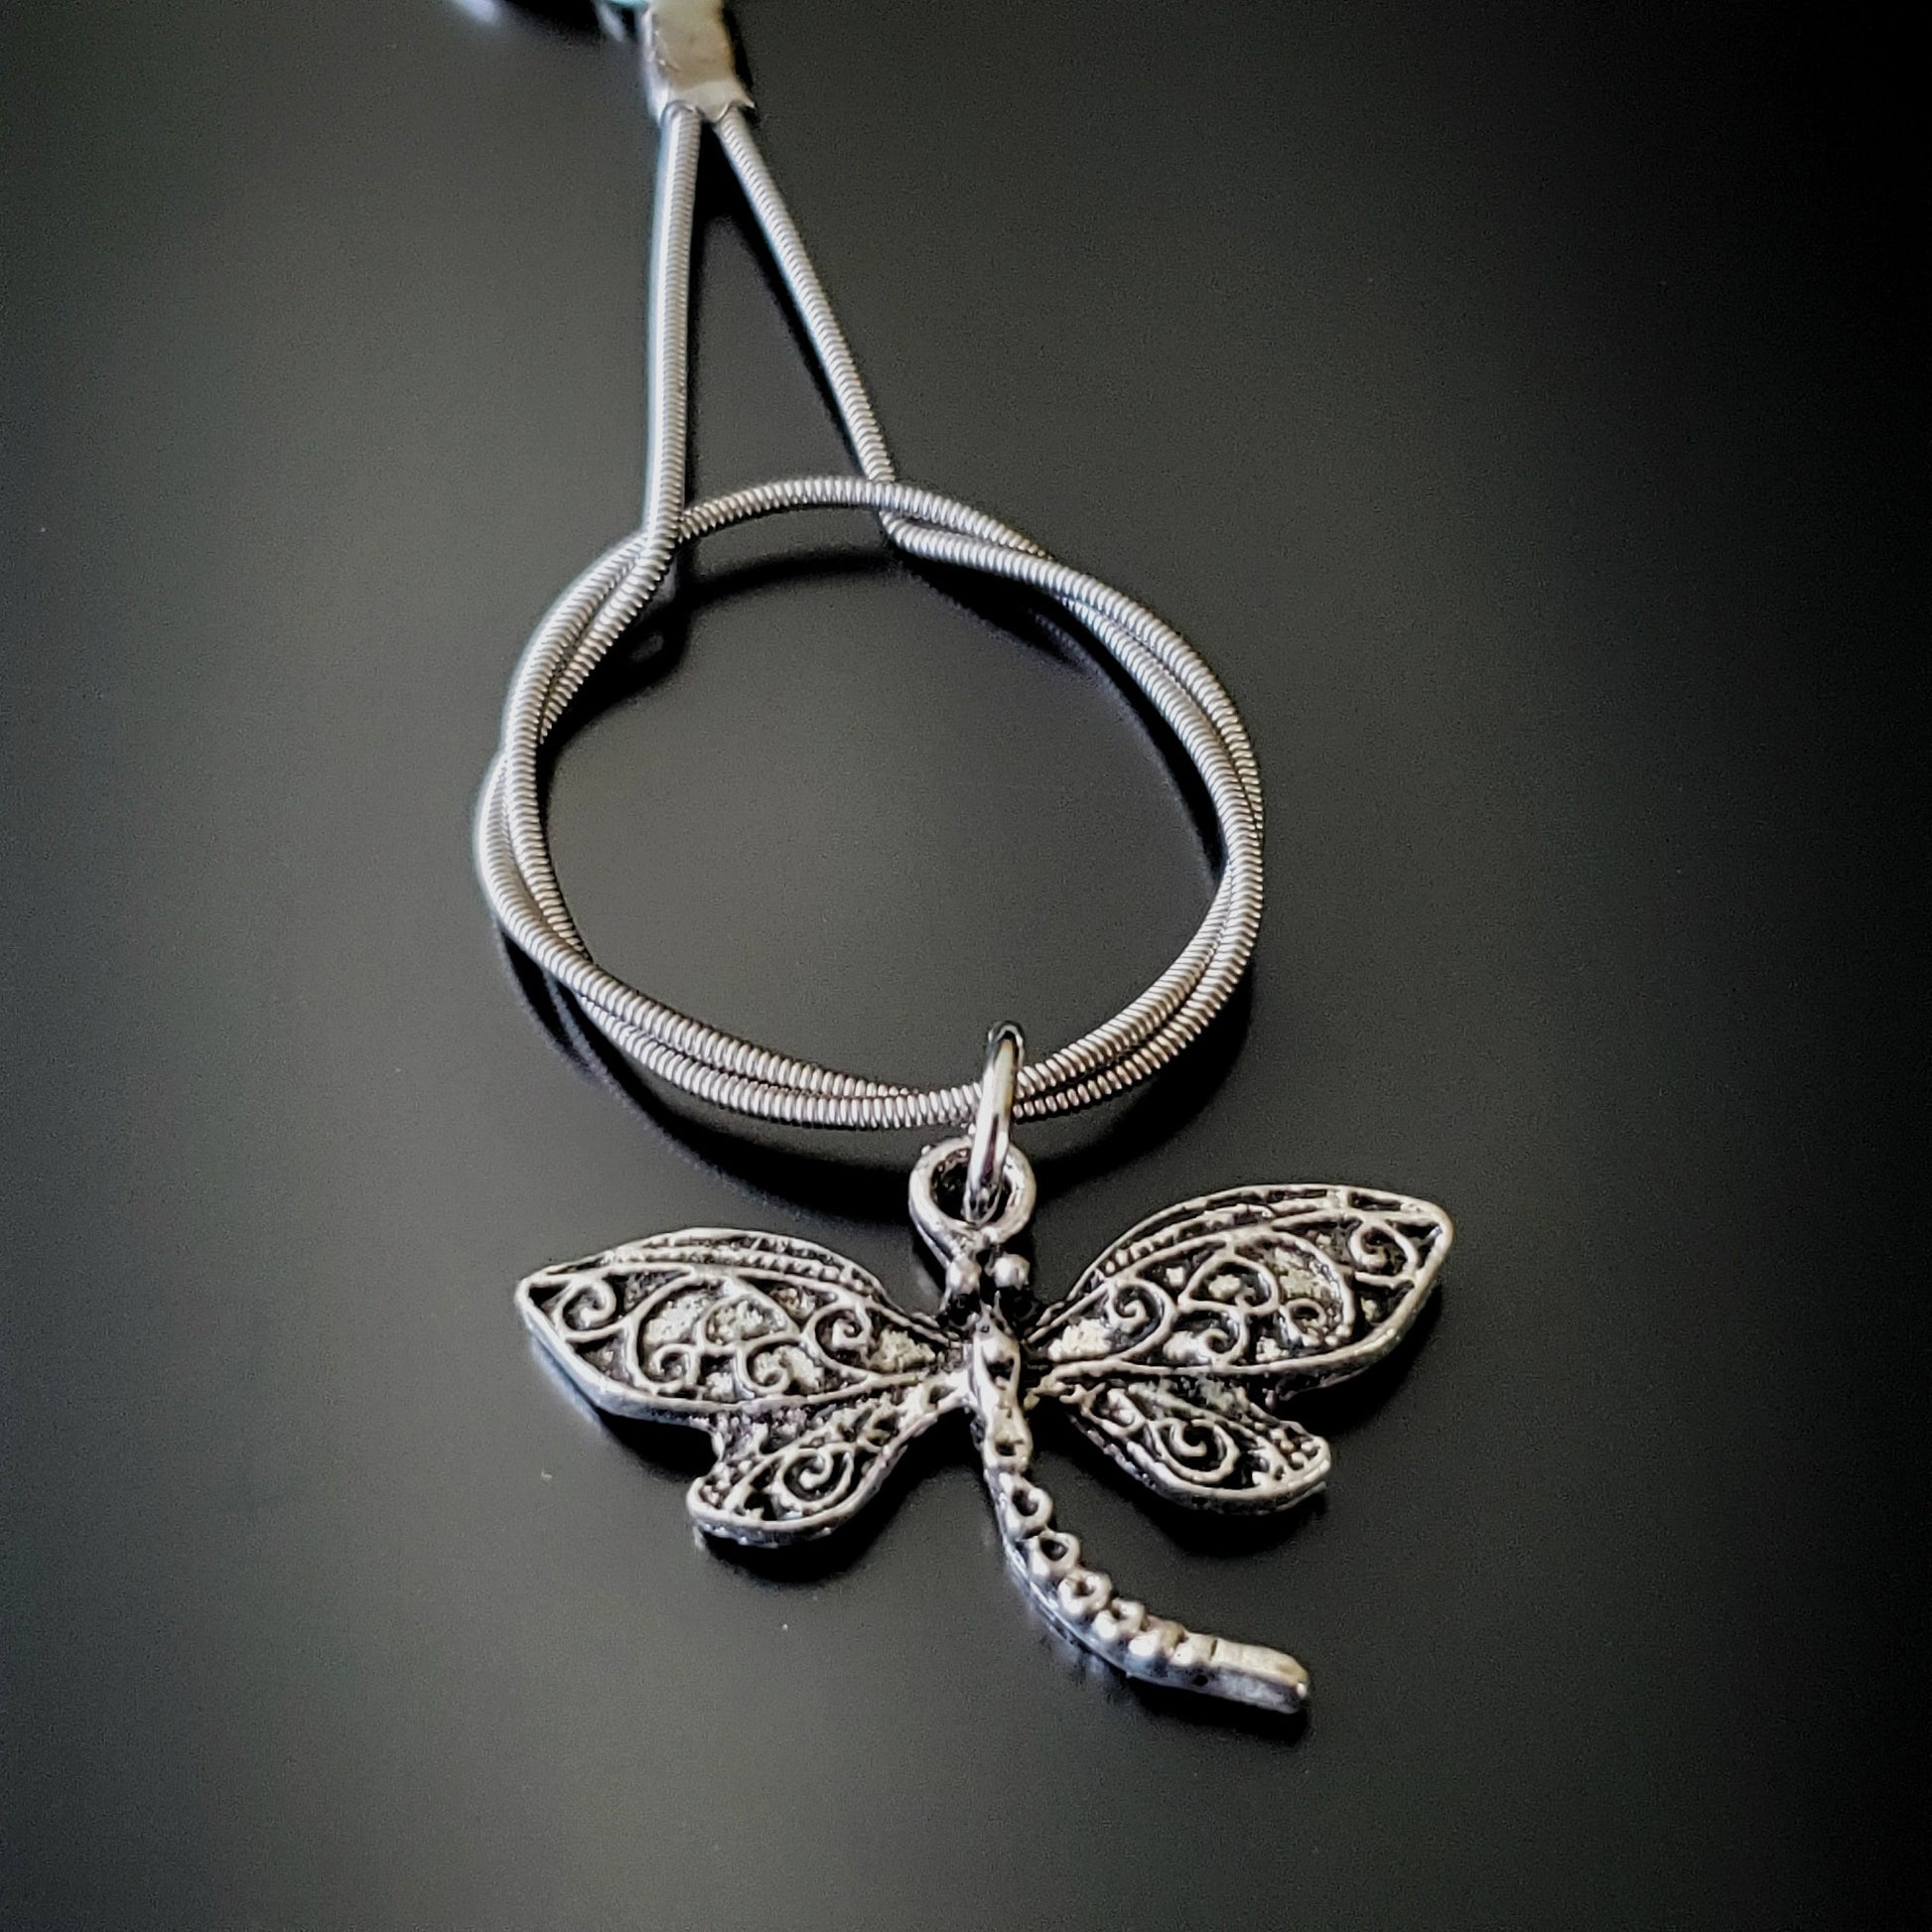 closeup of a silver coloured keychain made from an upcycled guitar string on which hangs a silver coloured dragonfly pendant